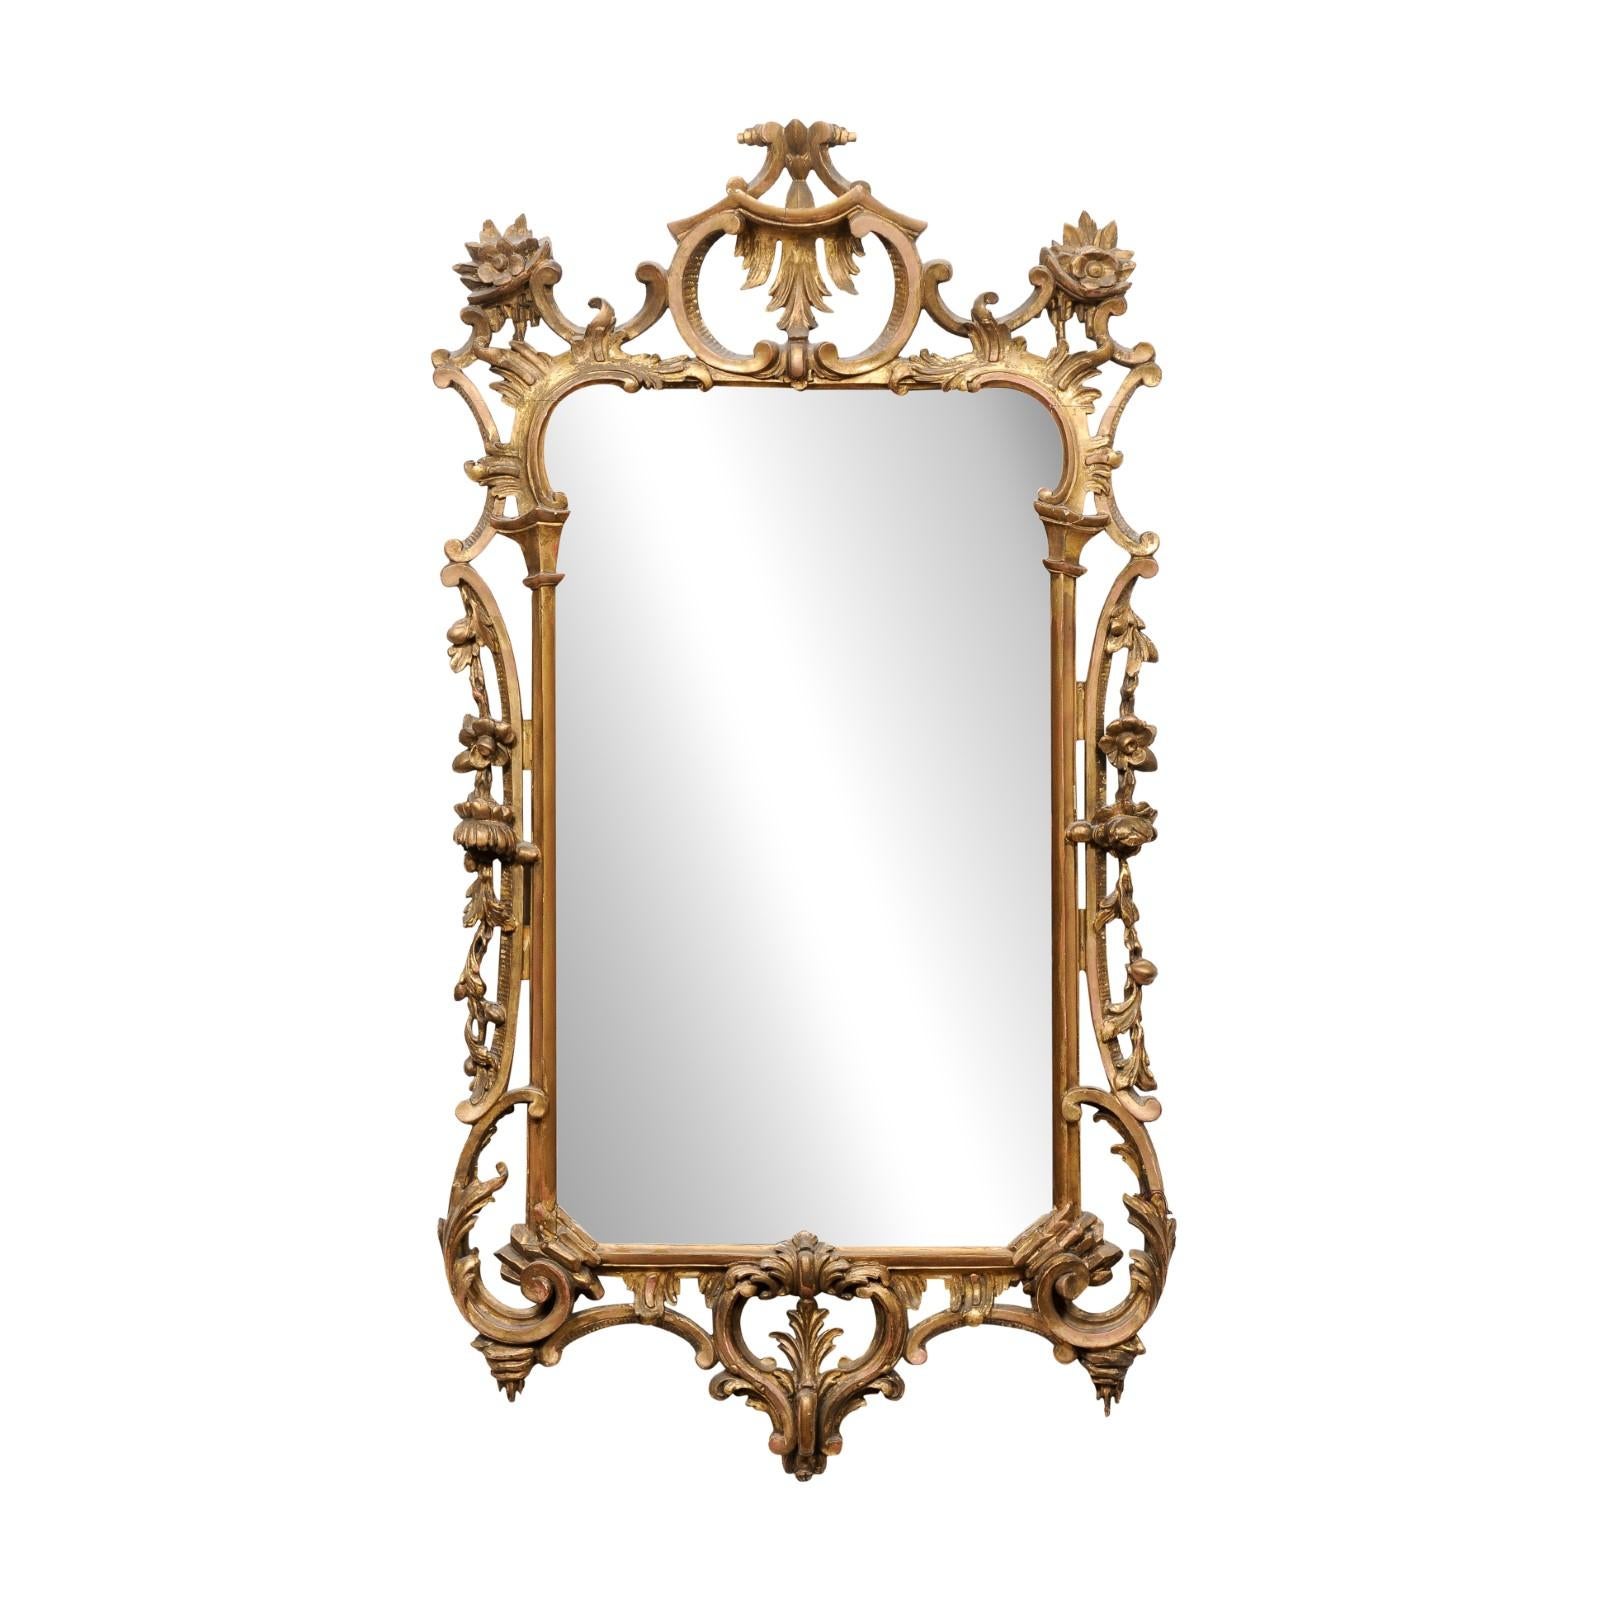  19th Century Giltwood English Chippendale Style Mirror In Good Condition For Sale In Atlanta, GA